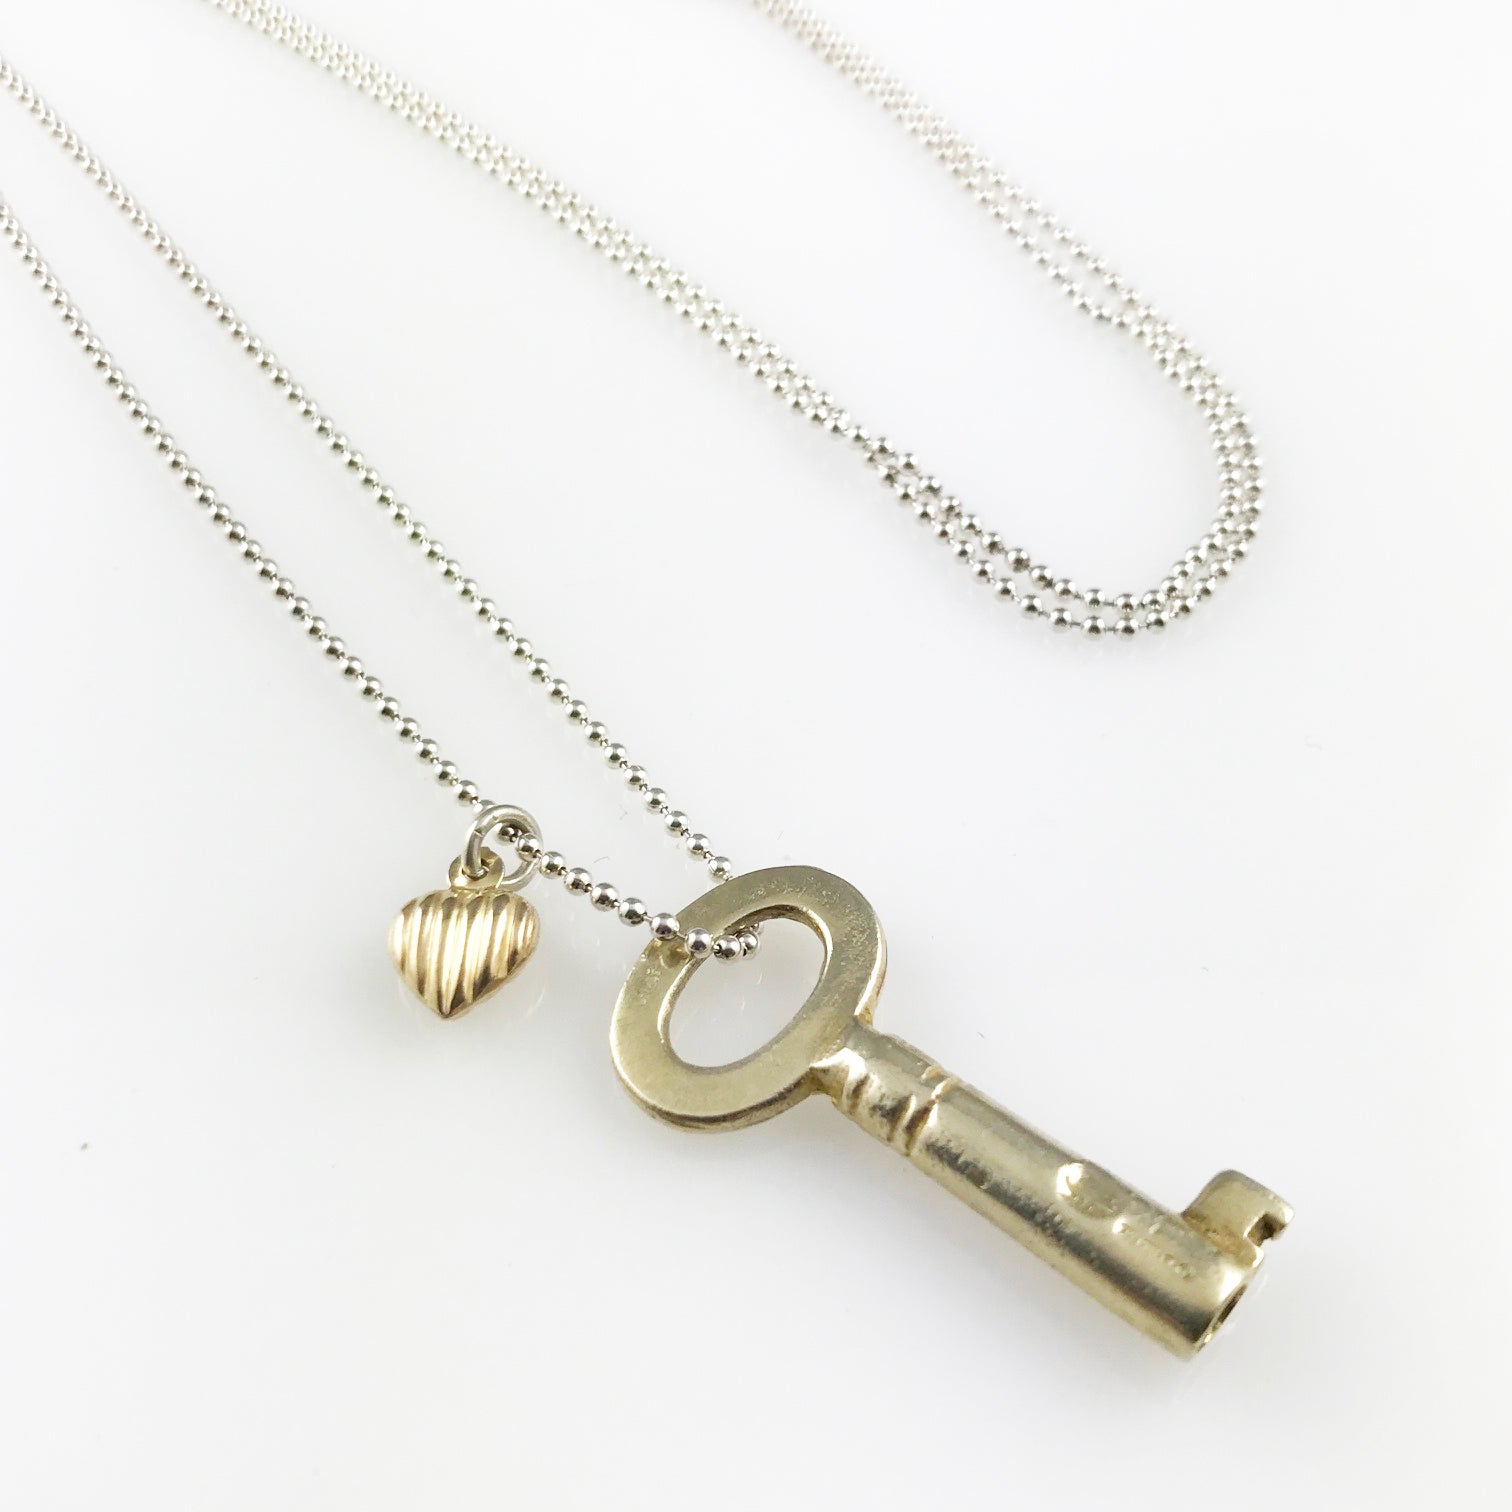 'Key to your heart' - gold plated silver key necklace with small gold heart